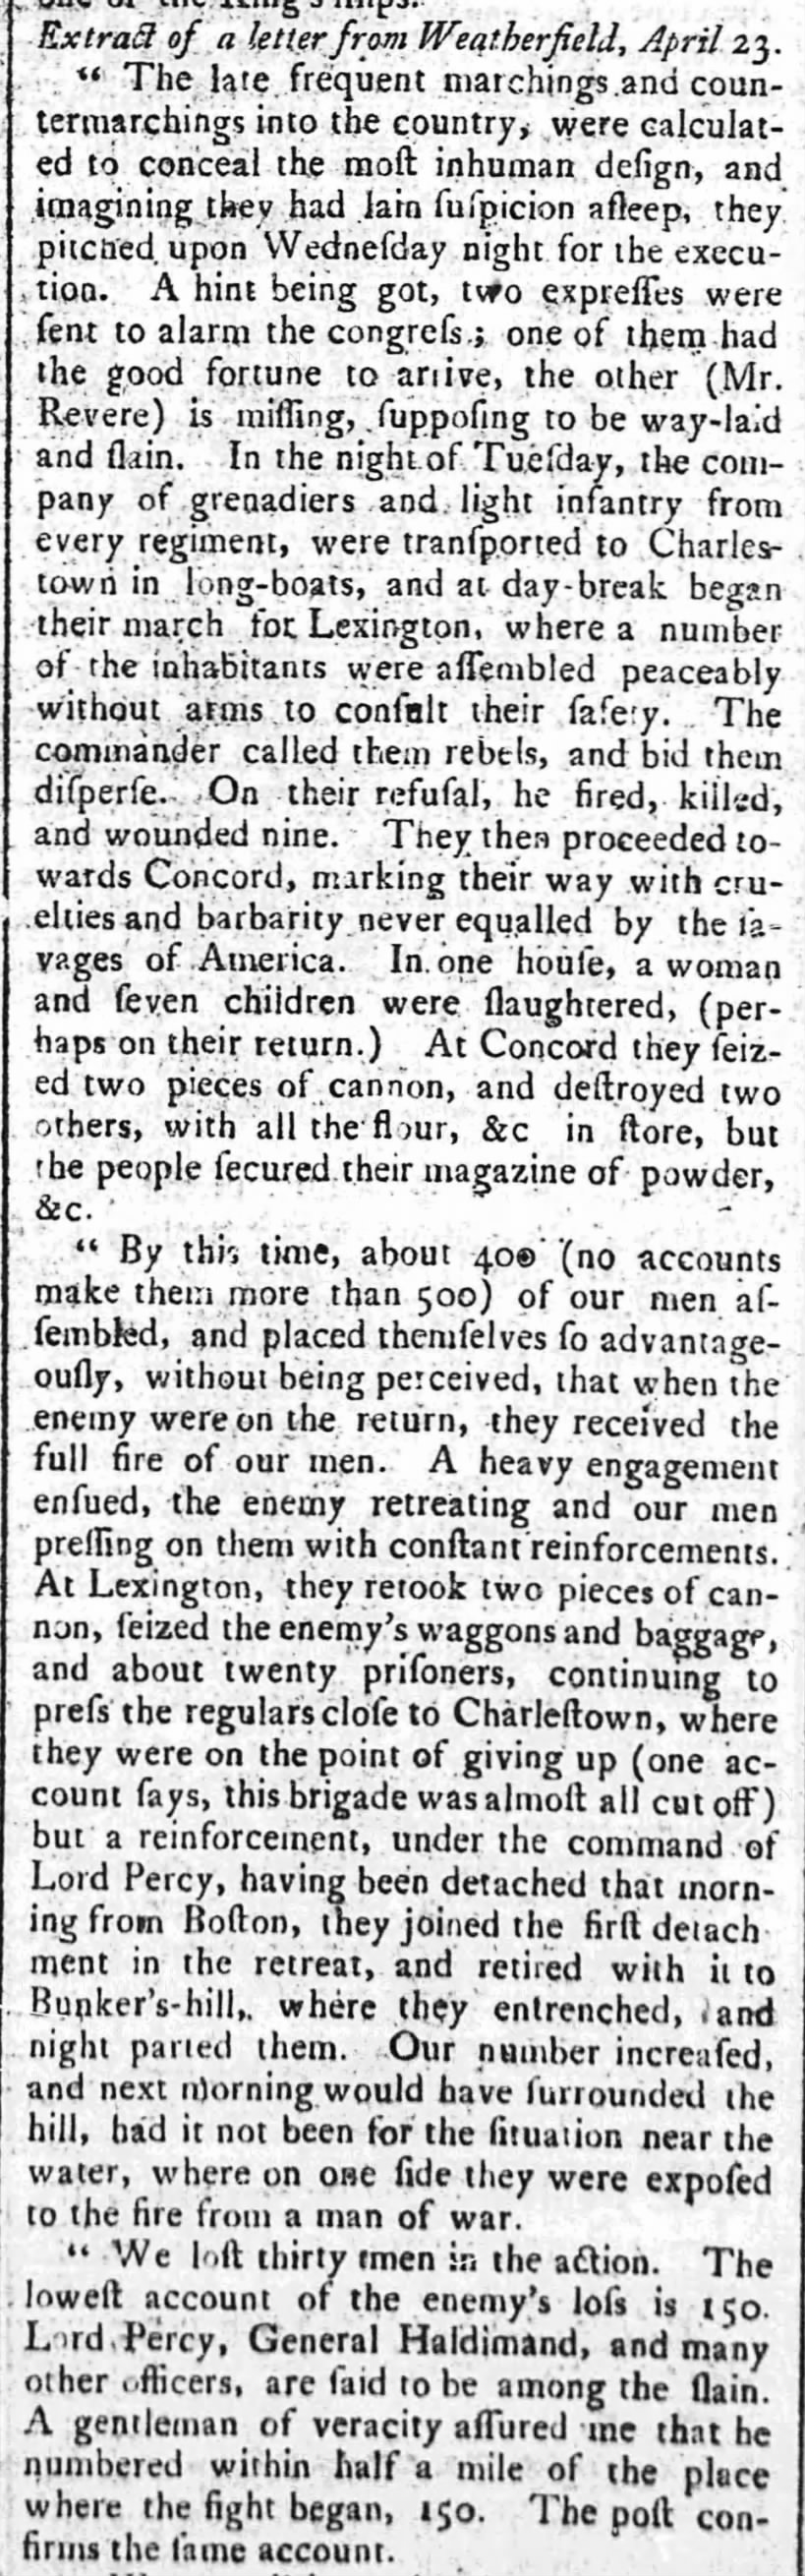 A letter with an American account of the Battles of Lexington and Concord on April 19, 1775